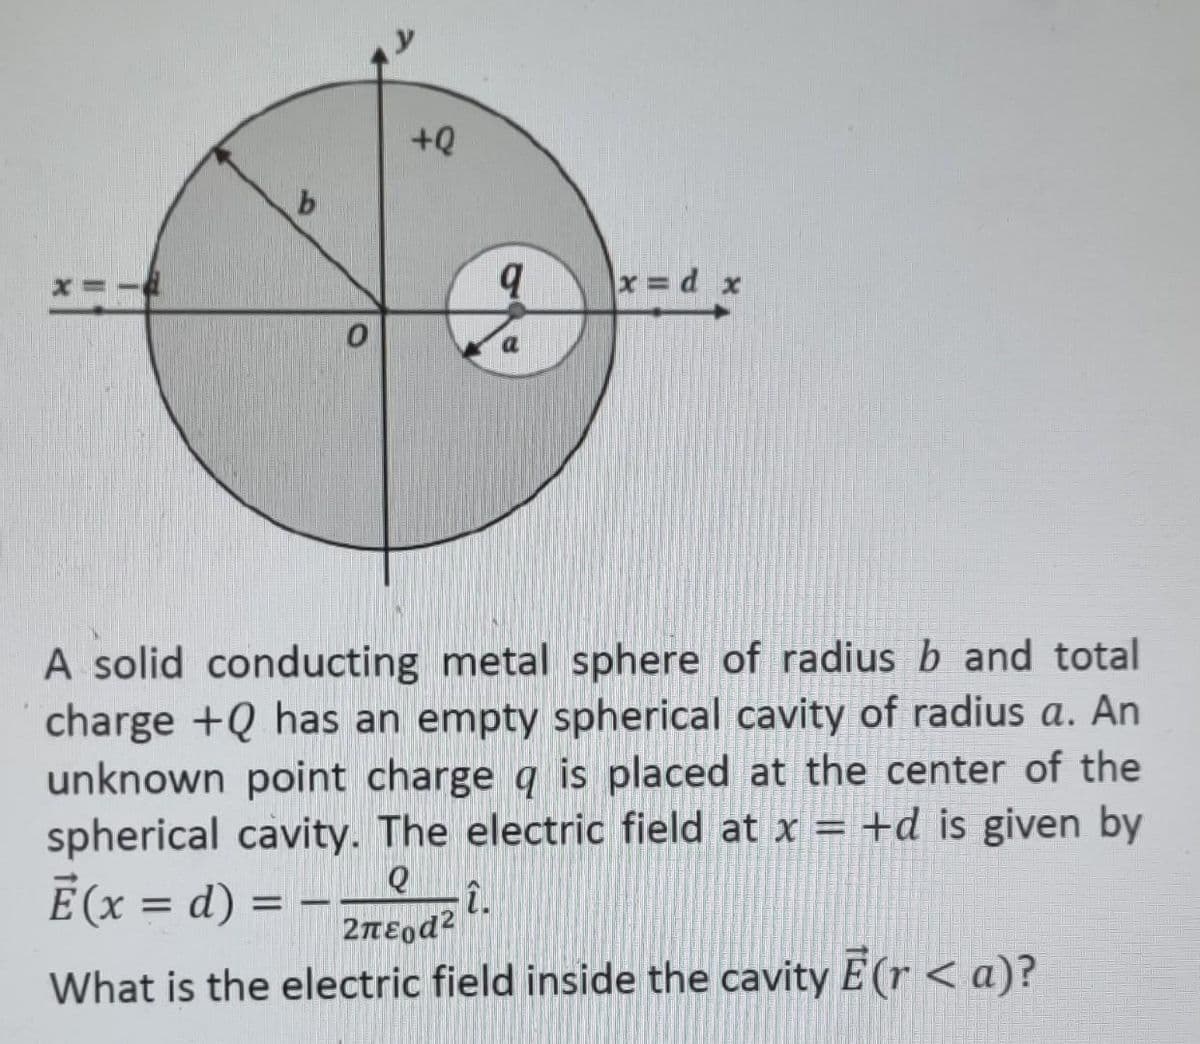 b
+Q
q
a
x=dx
A solid conducting metal sphere of radius b and total
charge +Q has an empty spherical cavity of radius a. An
unknown point charge q is placed at the center of the
spherical cavity. The electric field at x = +d is given by
Ē (x = d) = − î.
Q
2nd²
What is the electric field inside the cavity E(r <a)?